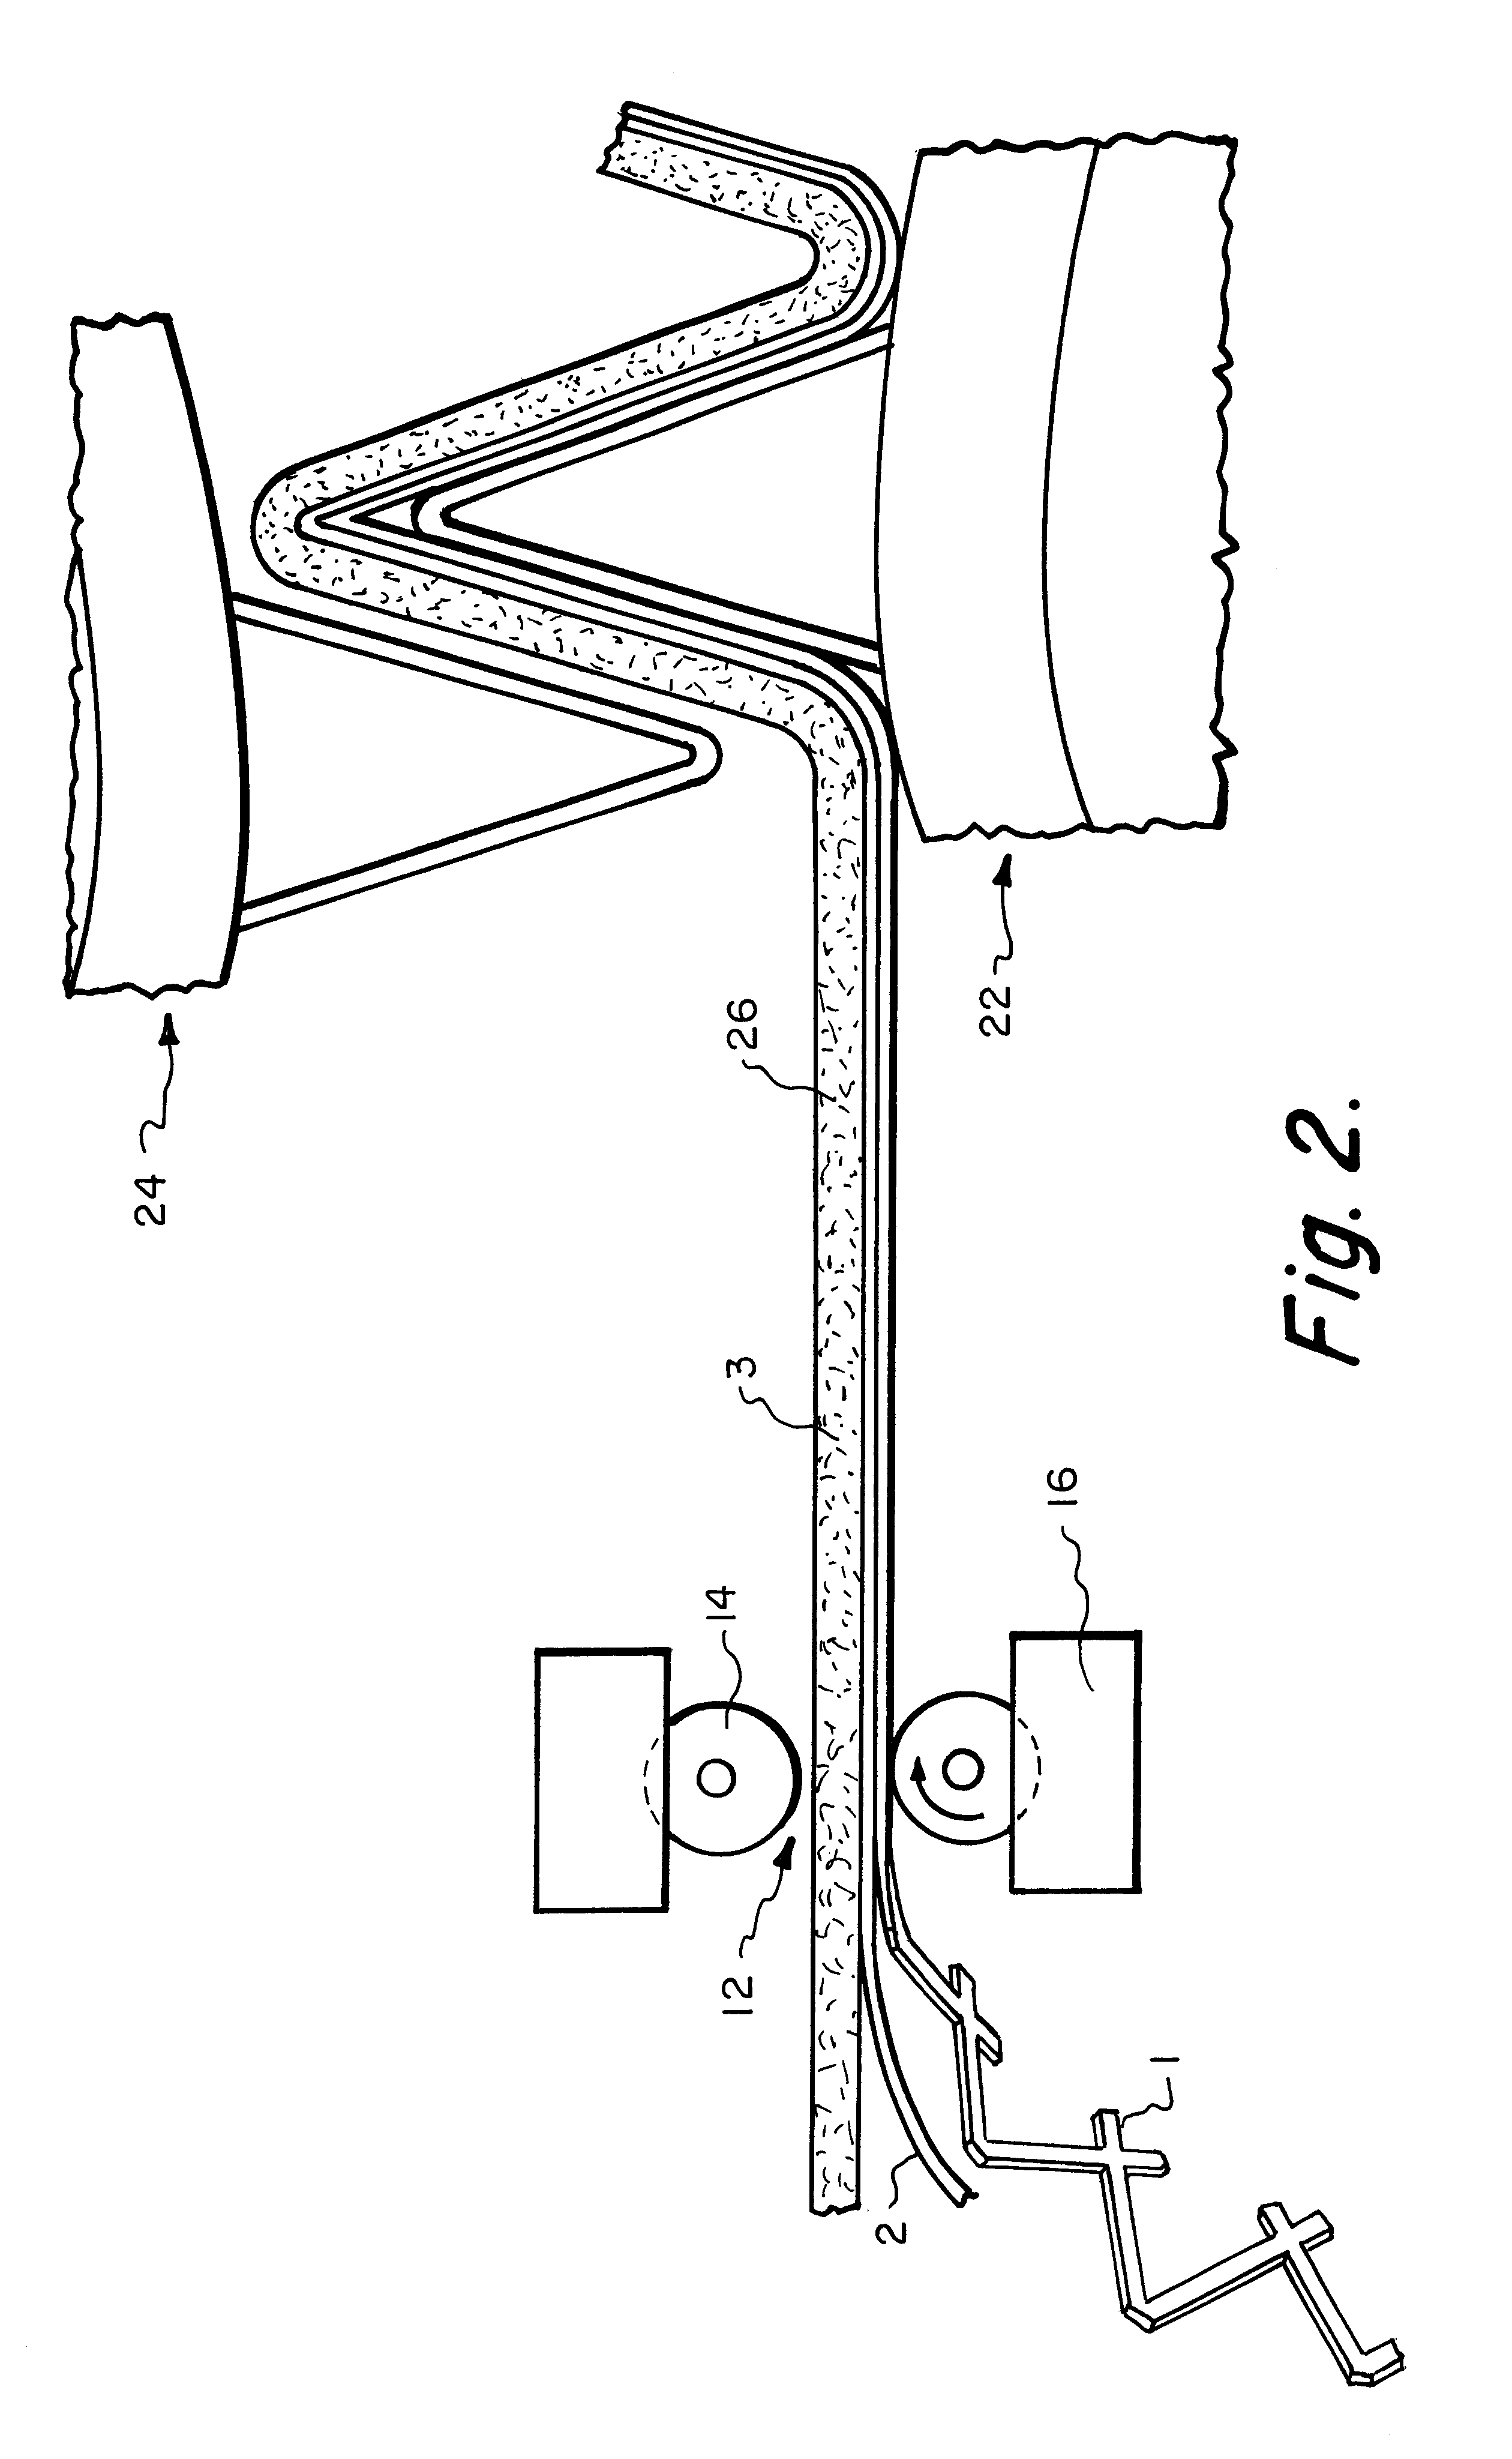 High efficiency permanent air filter and method of manufacture